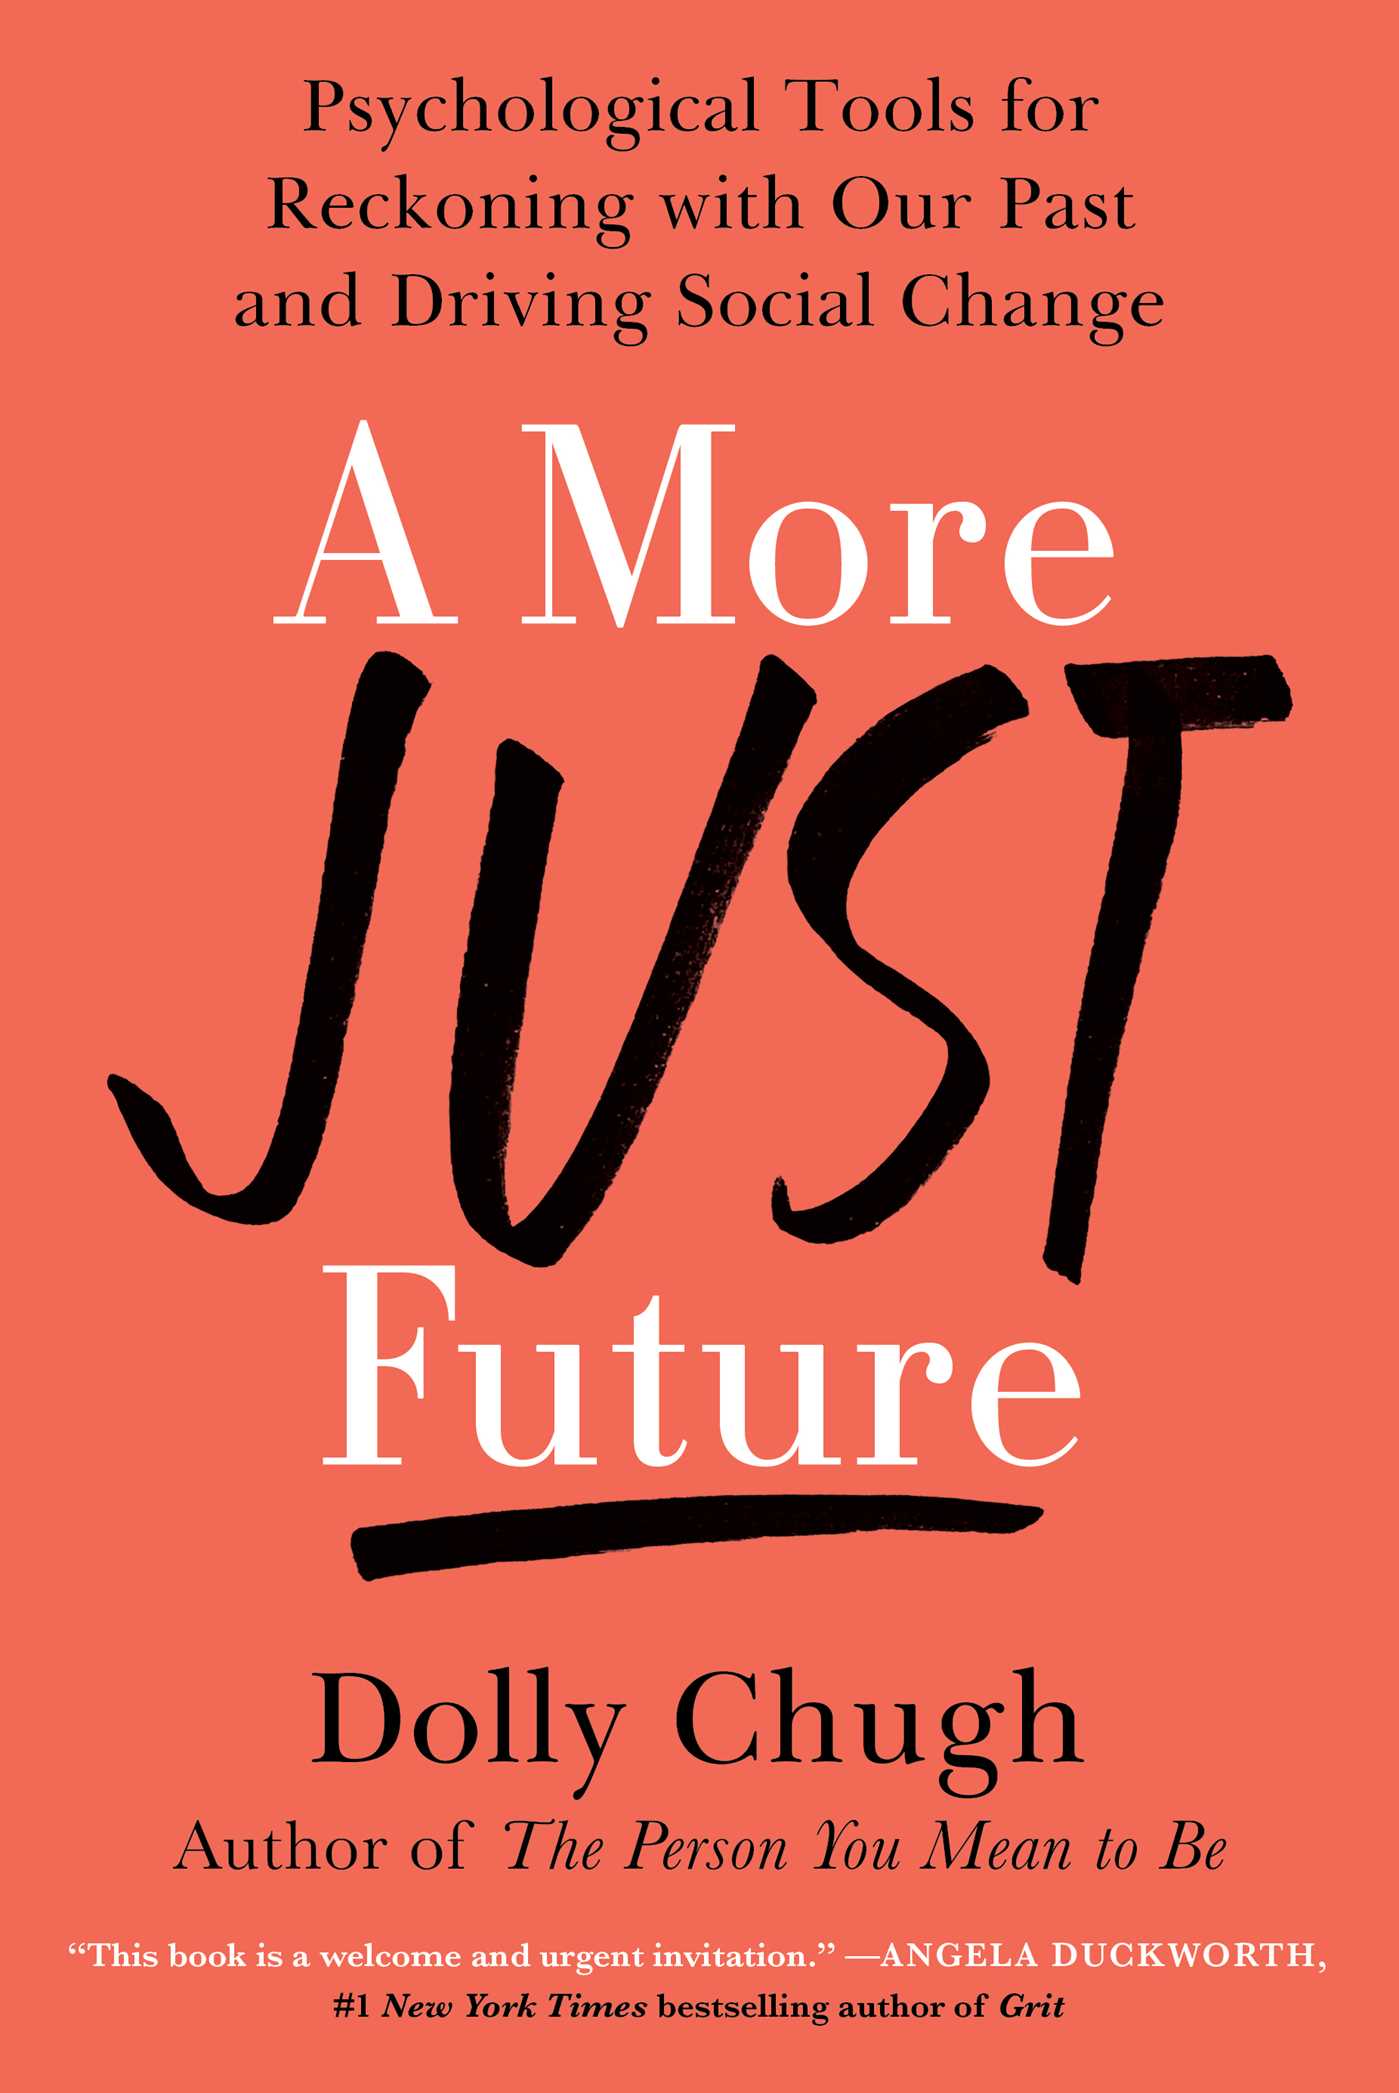 A More Just Future: Psychological Tools